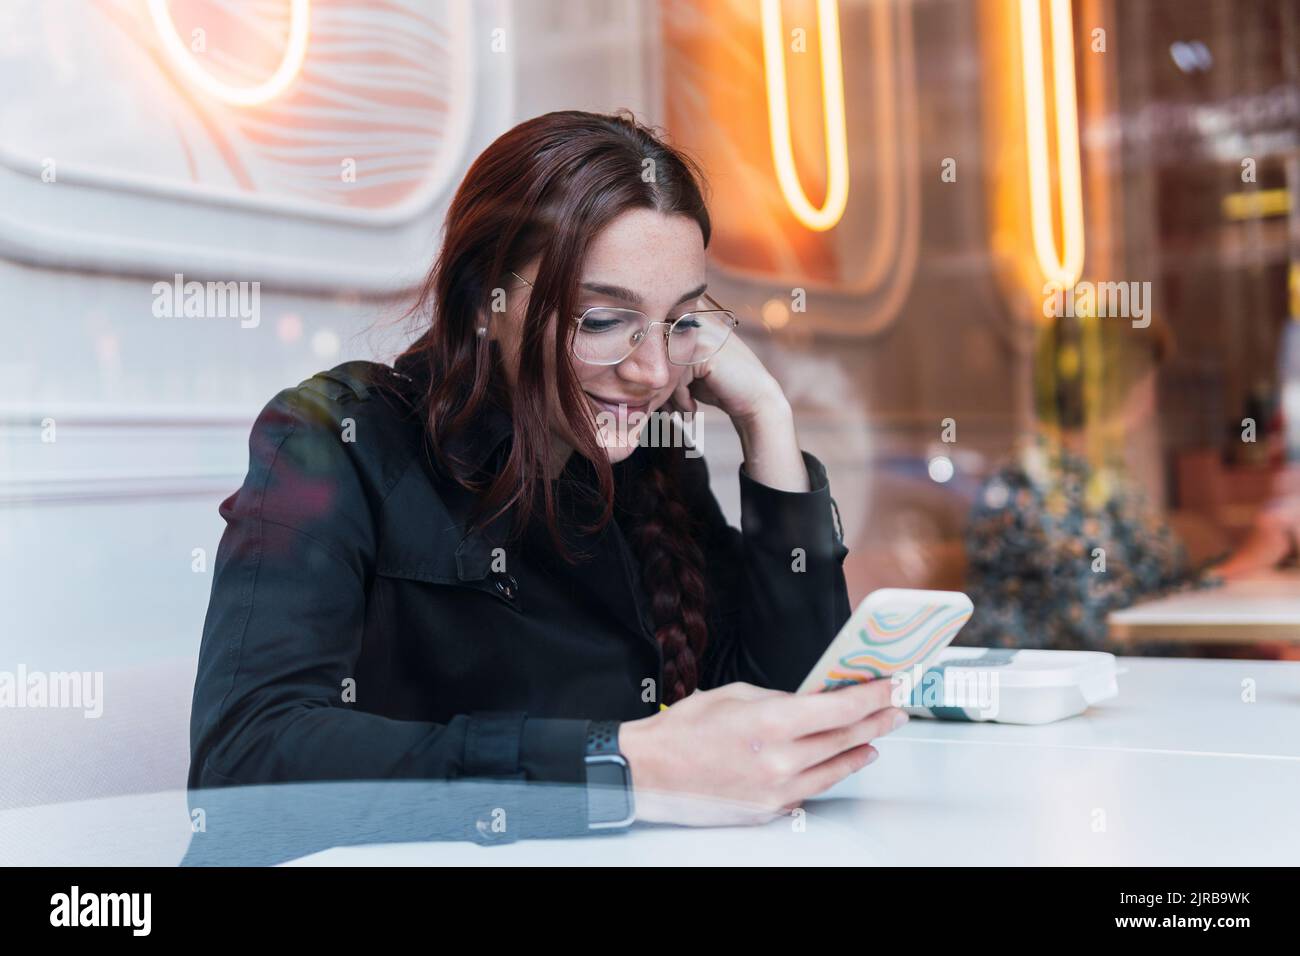 Smiling young woman using smart phone sitting at cafe Stock Photo